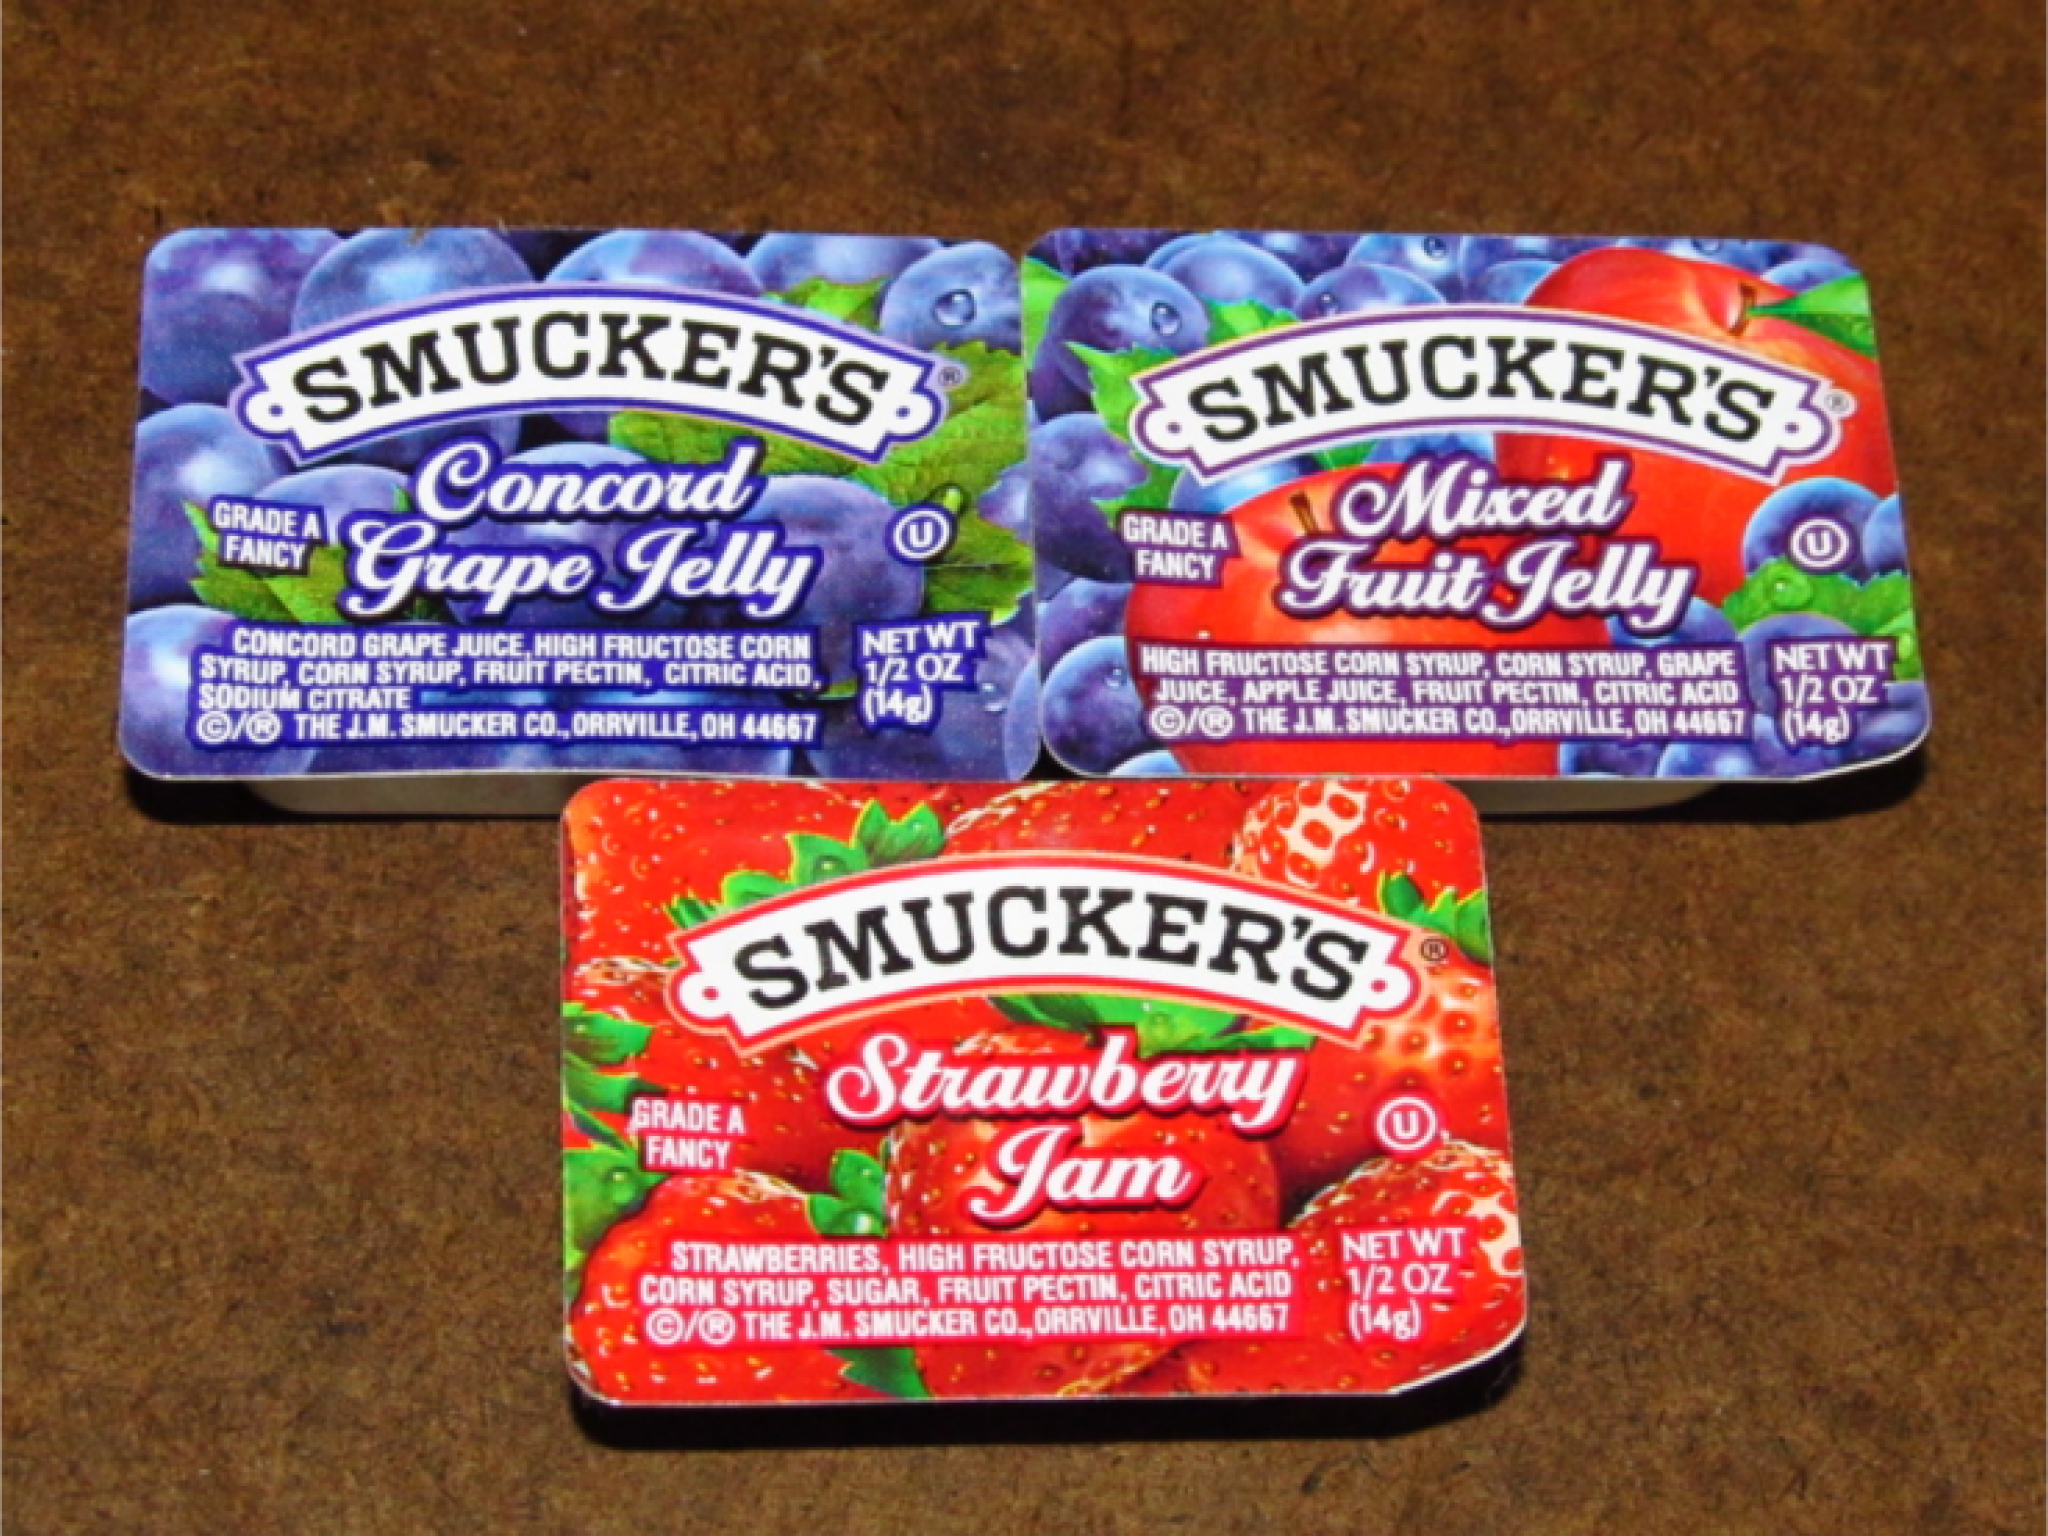  why-jm-smucker-company-shares-are-falling-today 